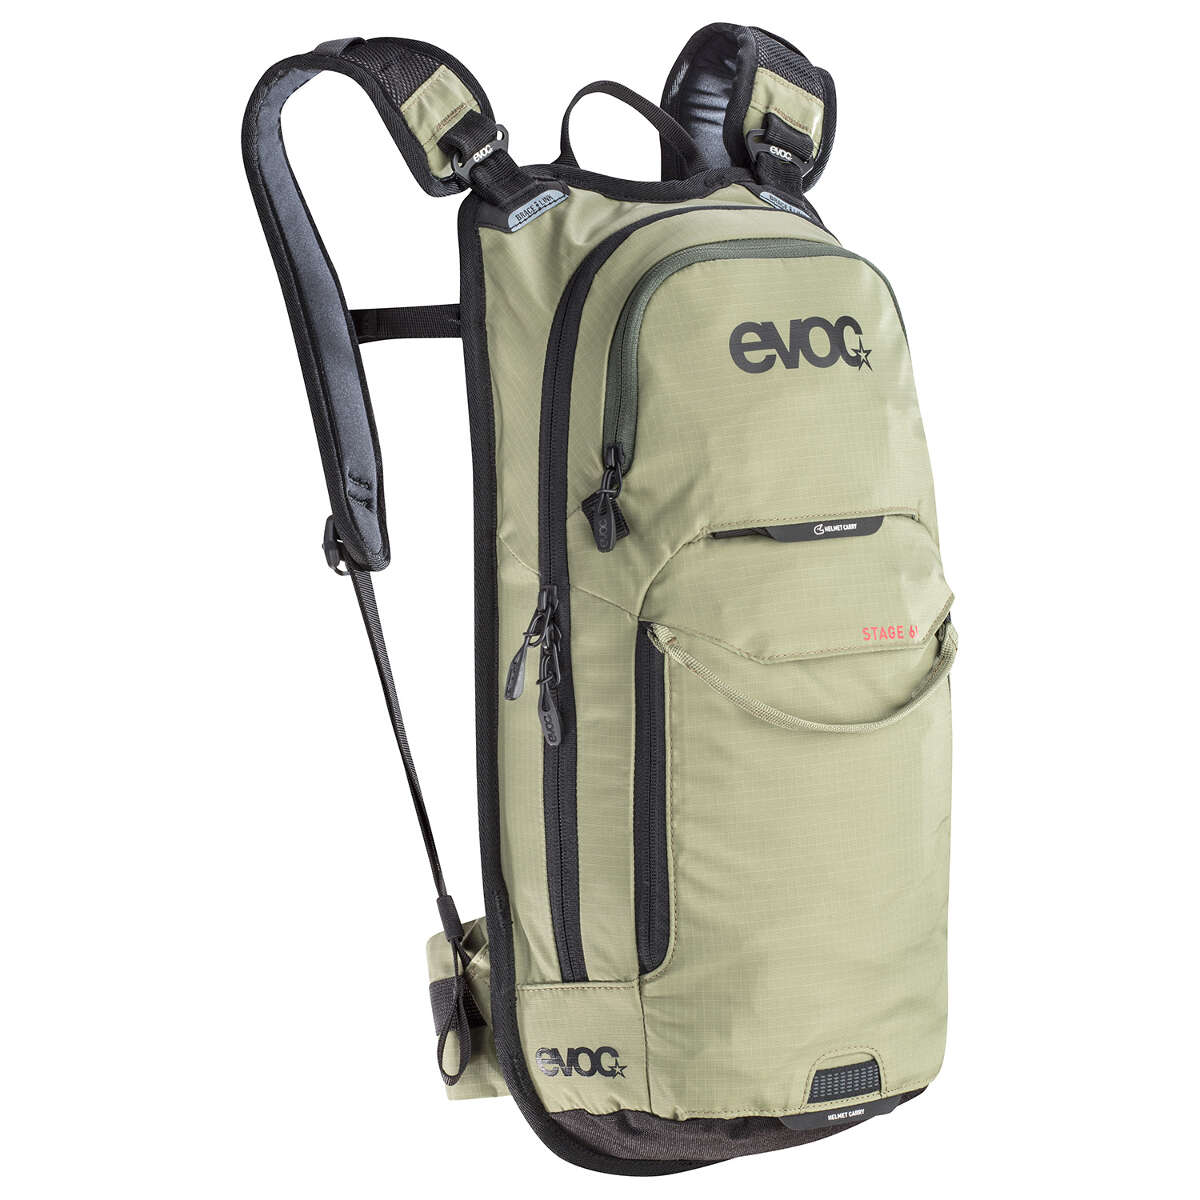 Evoc Backpack with Hydration System Compartment Stage Light-Olive, 6 Liter